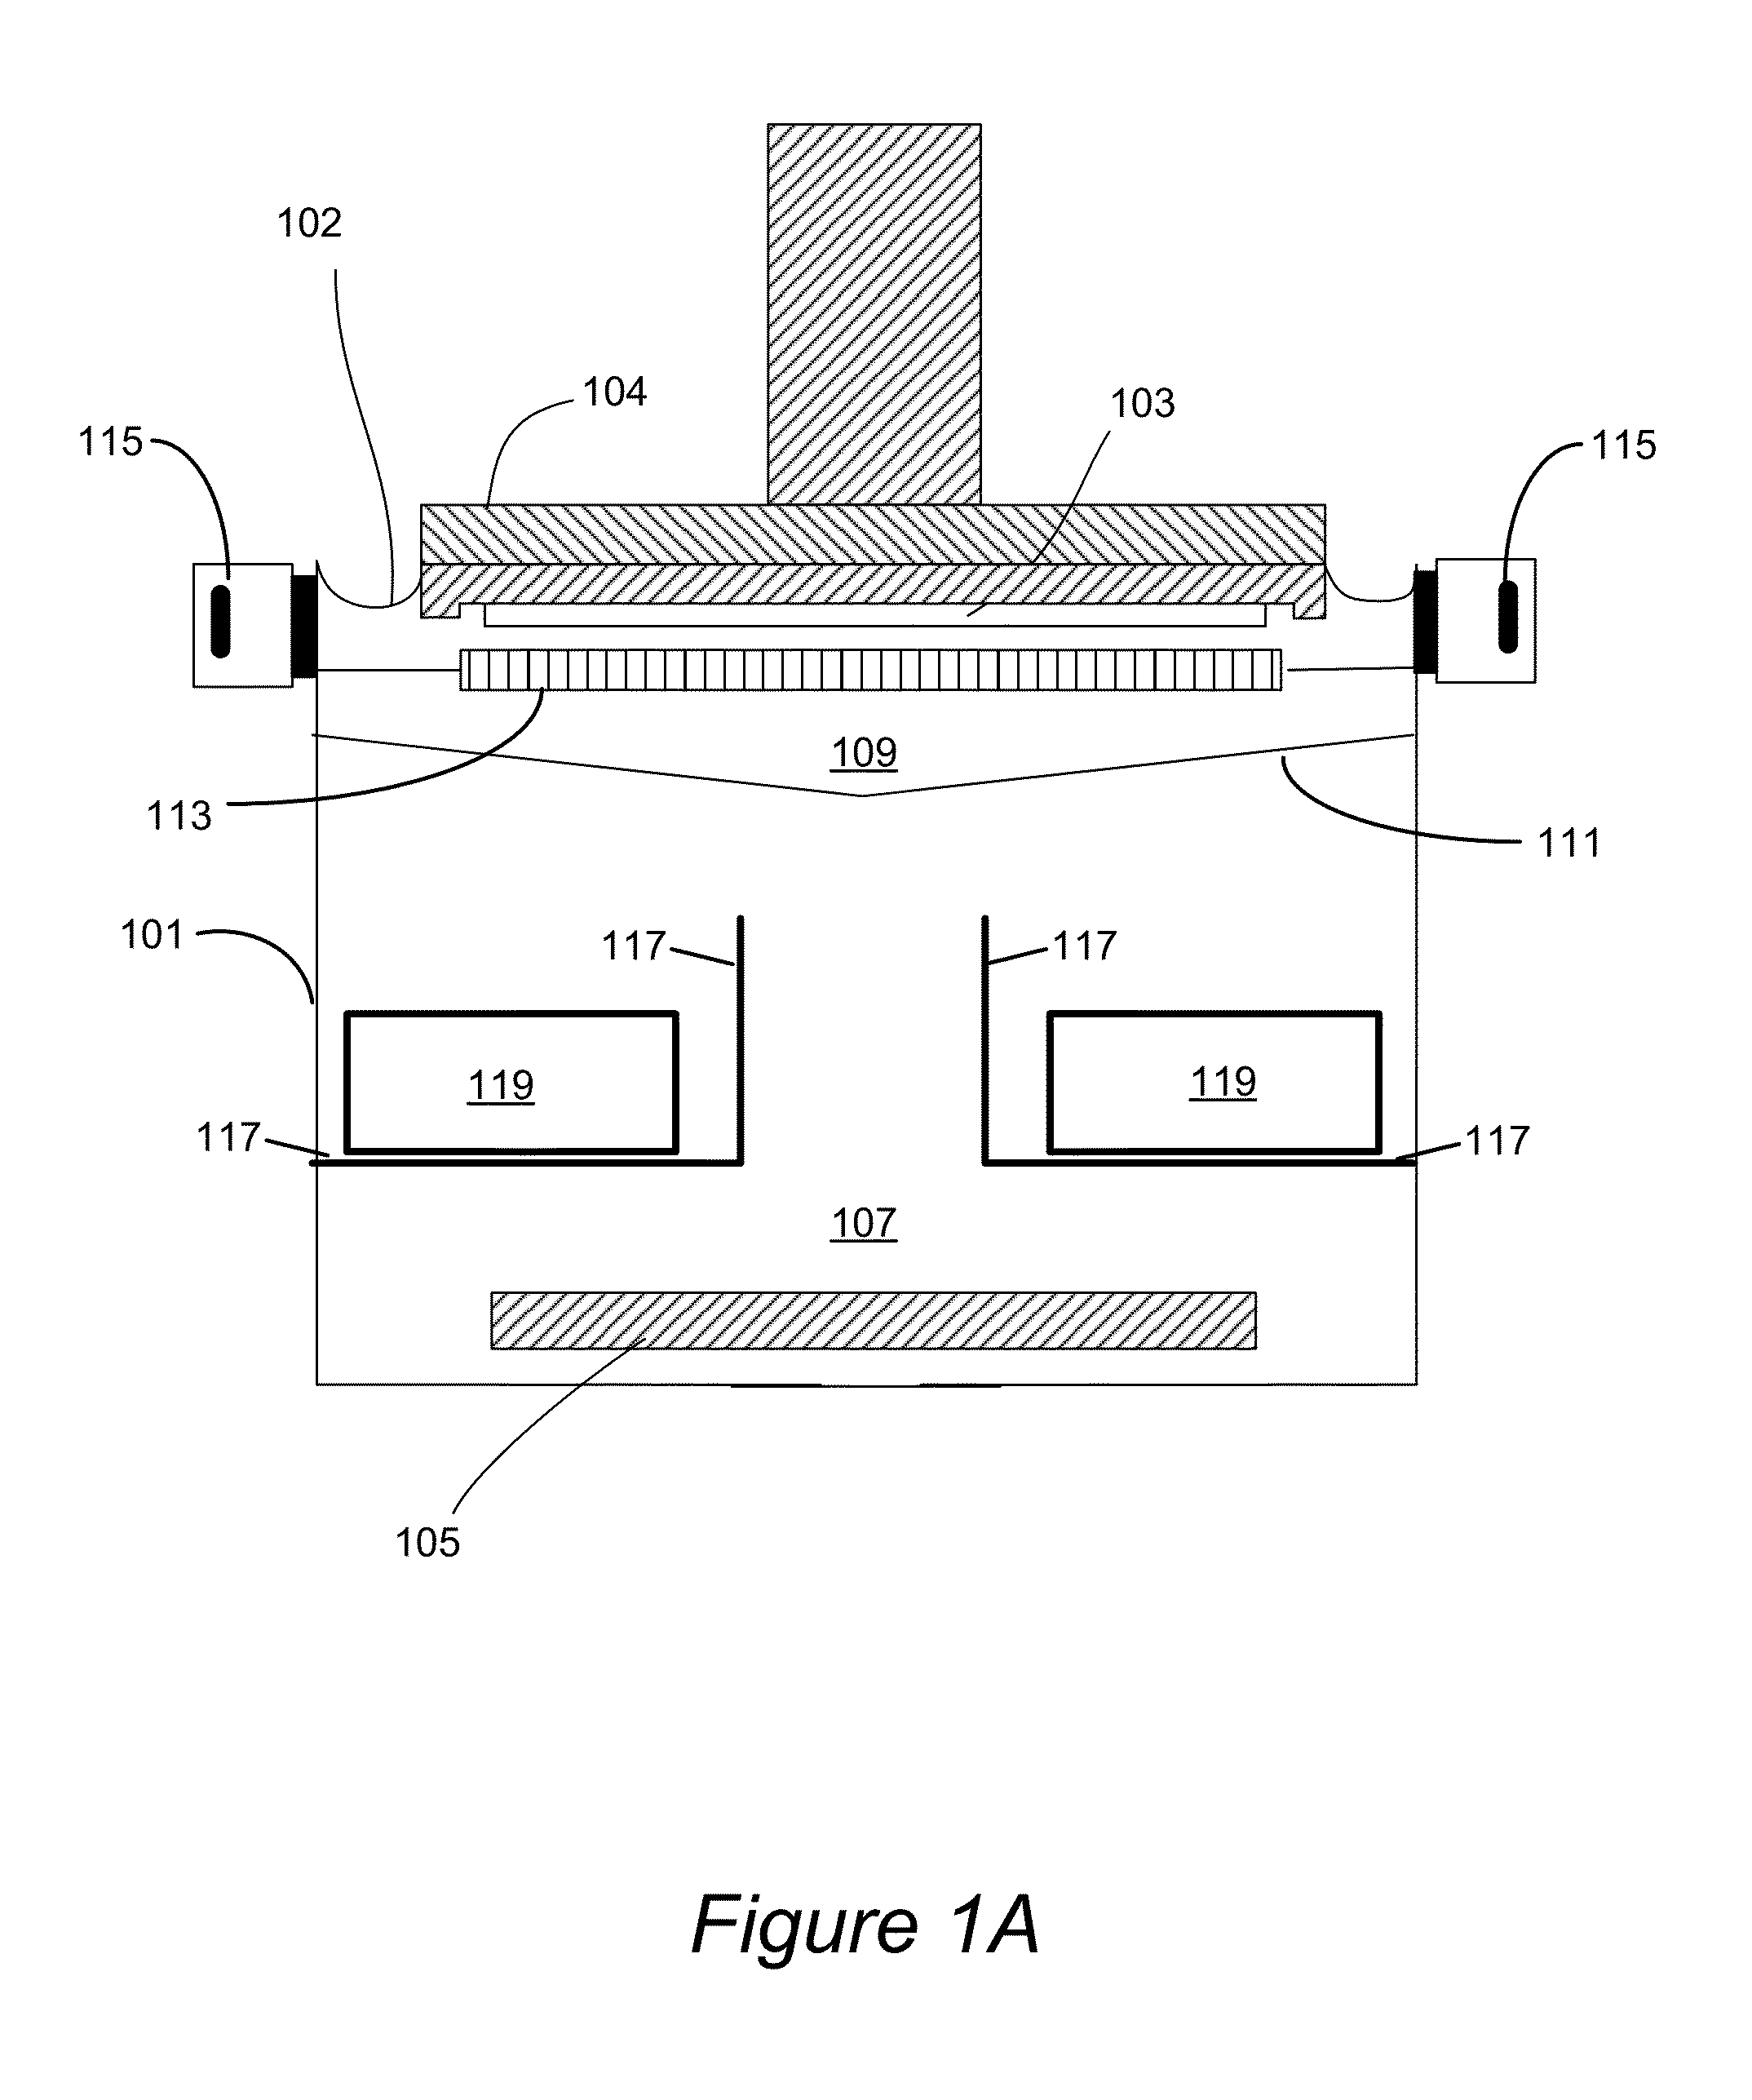 Method and apparatus for dynamic current distribution control during electroplating